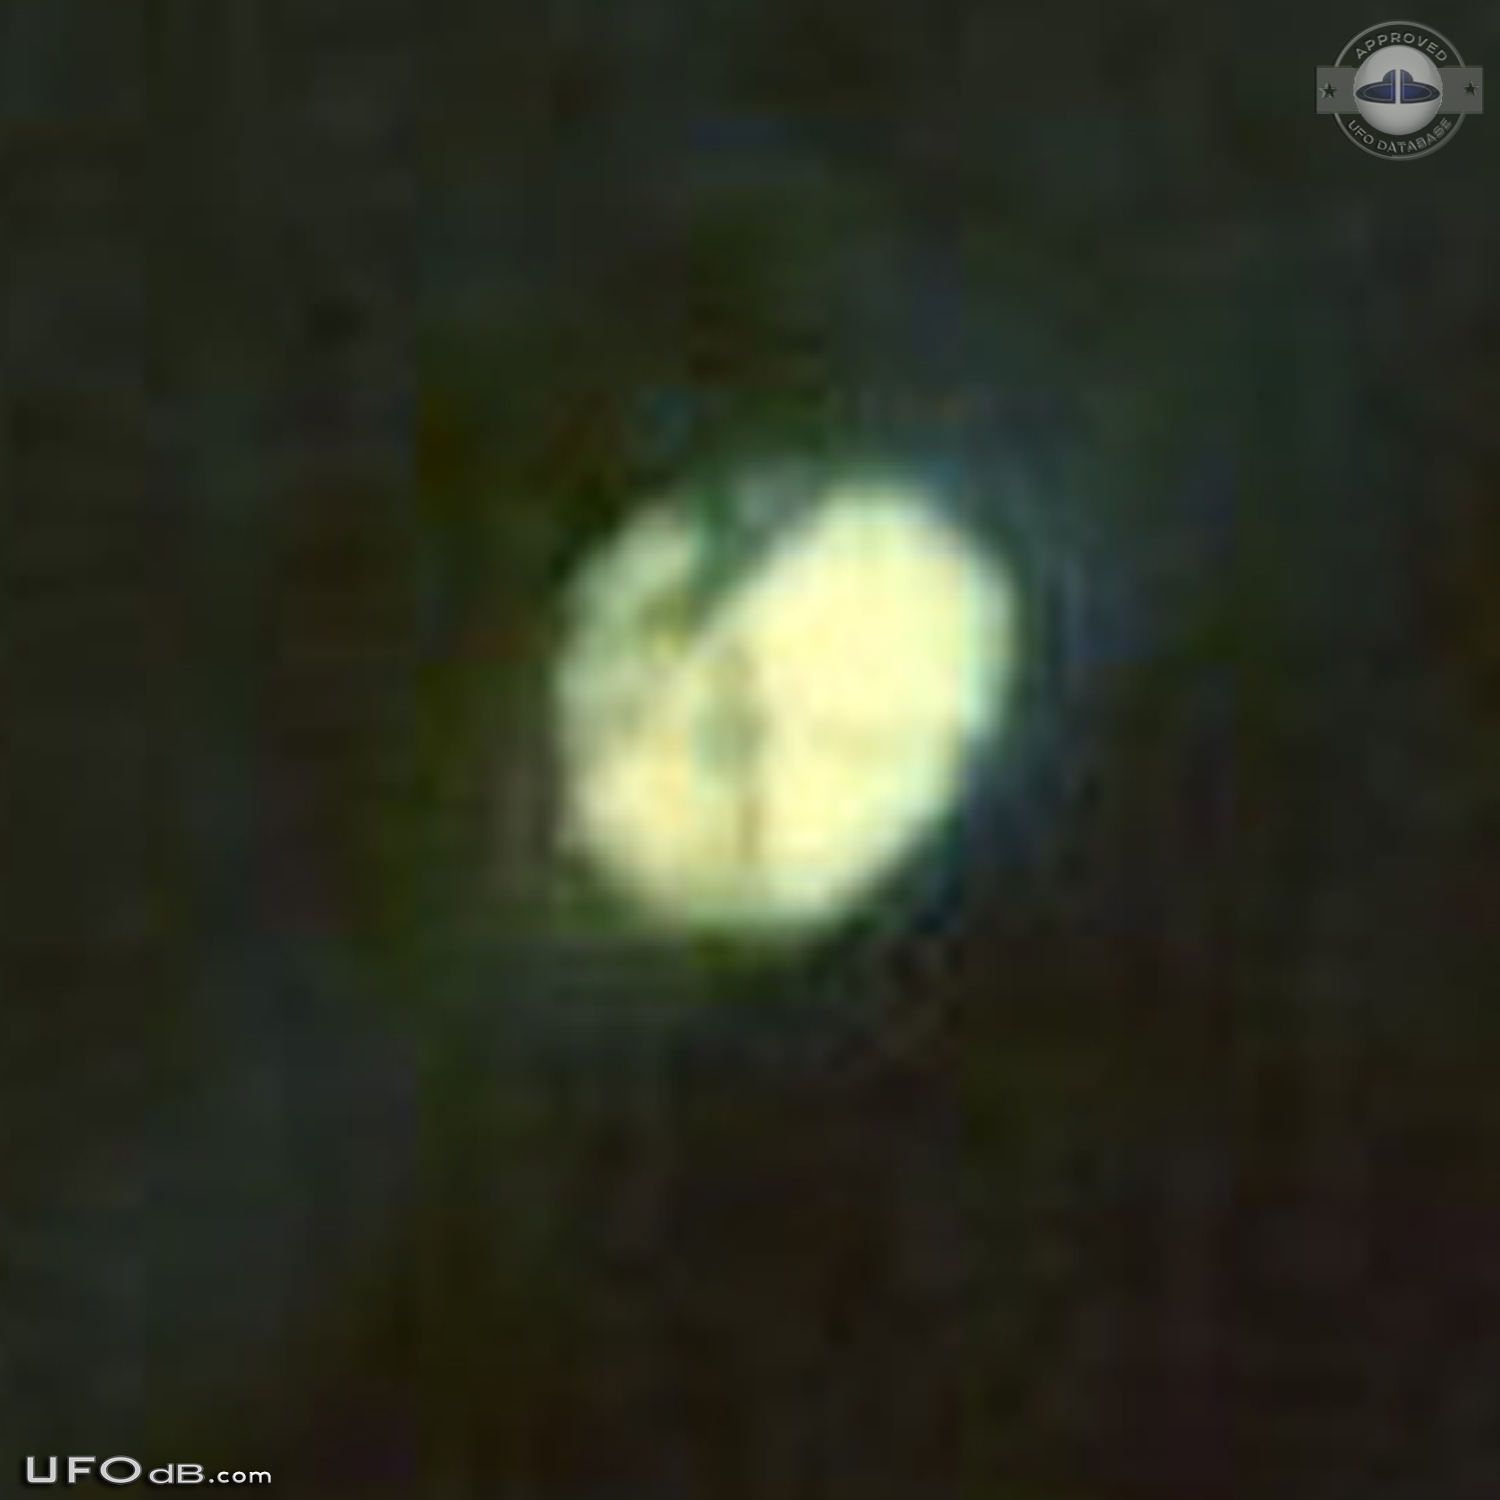 Silent Gold Disc UFO caught on picture - Rhenen, the Netherlands 2014 UFO Picture #572-4